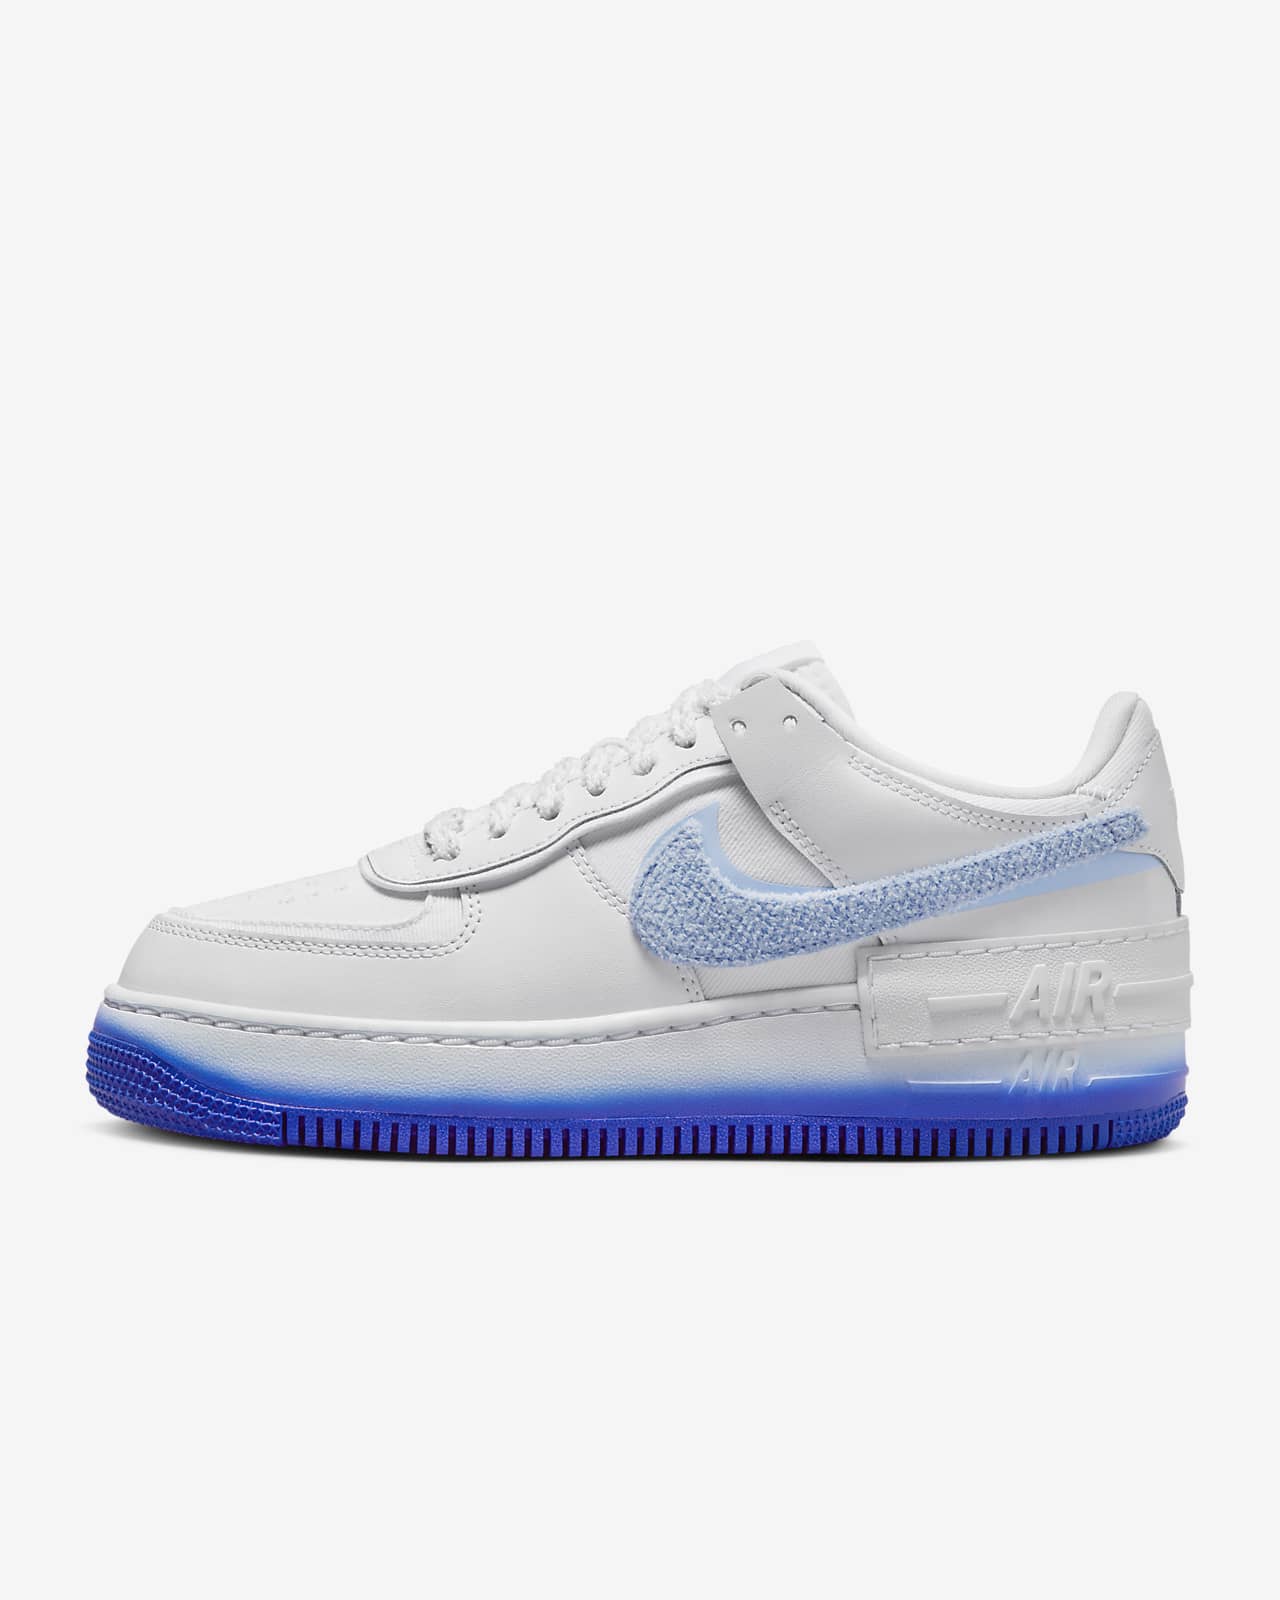 Onzuiver betreden Parana rivier Nike Air Force 1 Shadow Women's Shoes. Nike.com